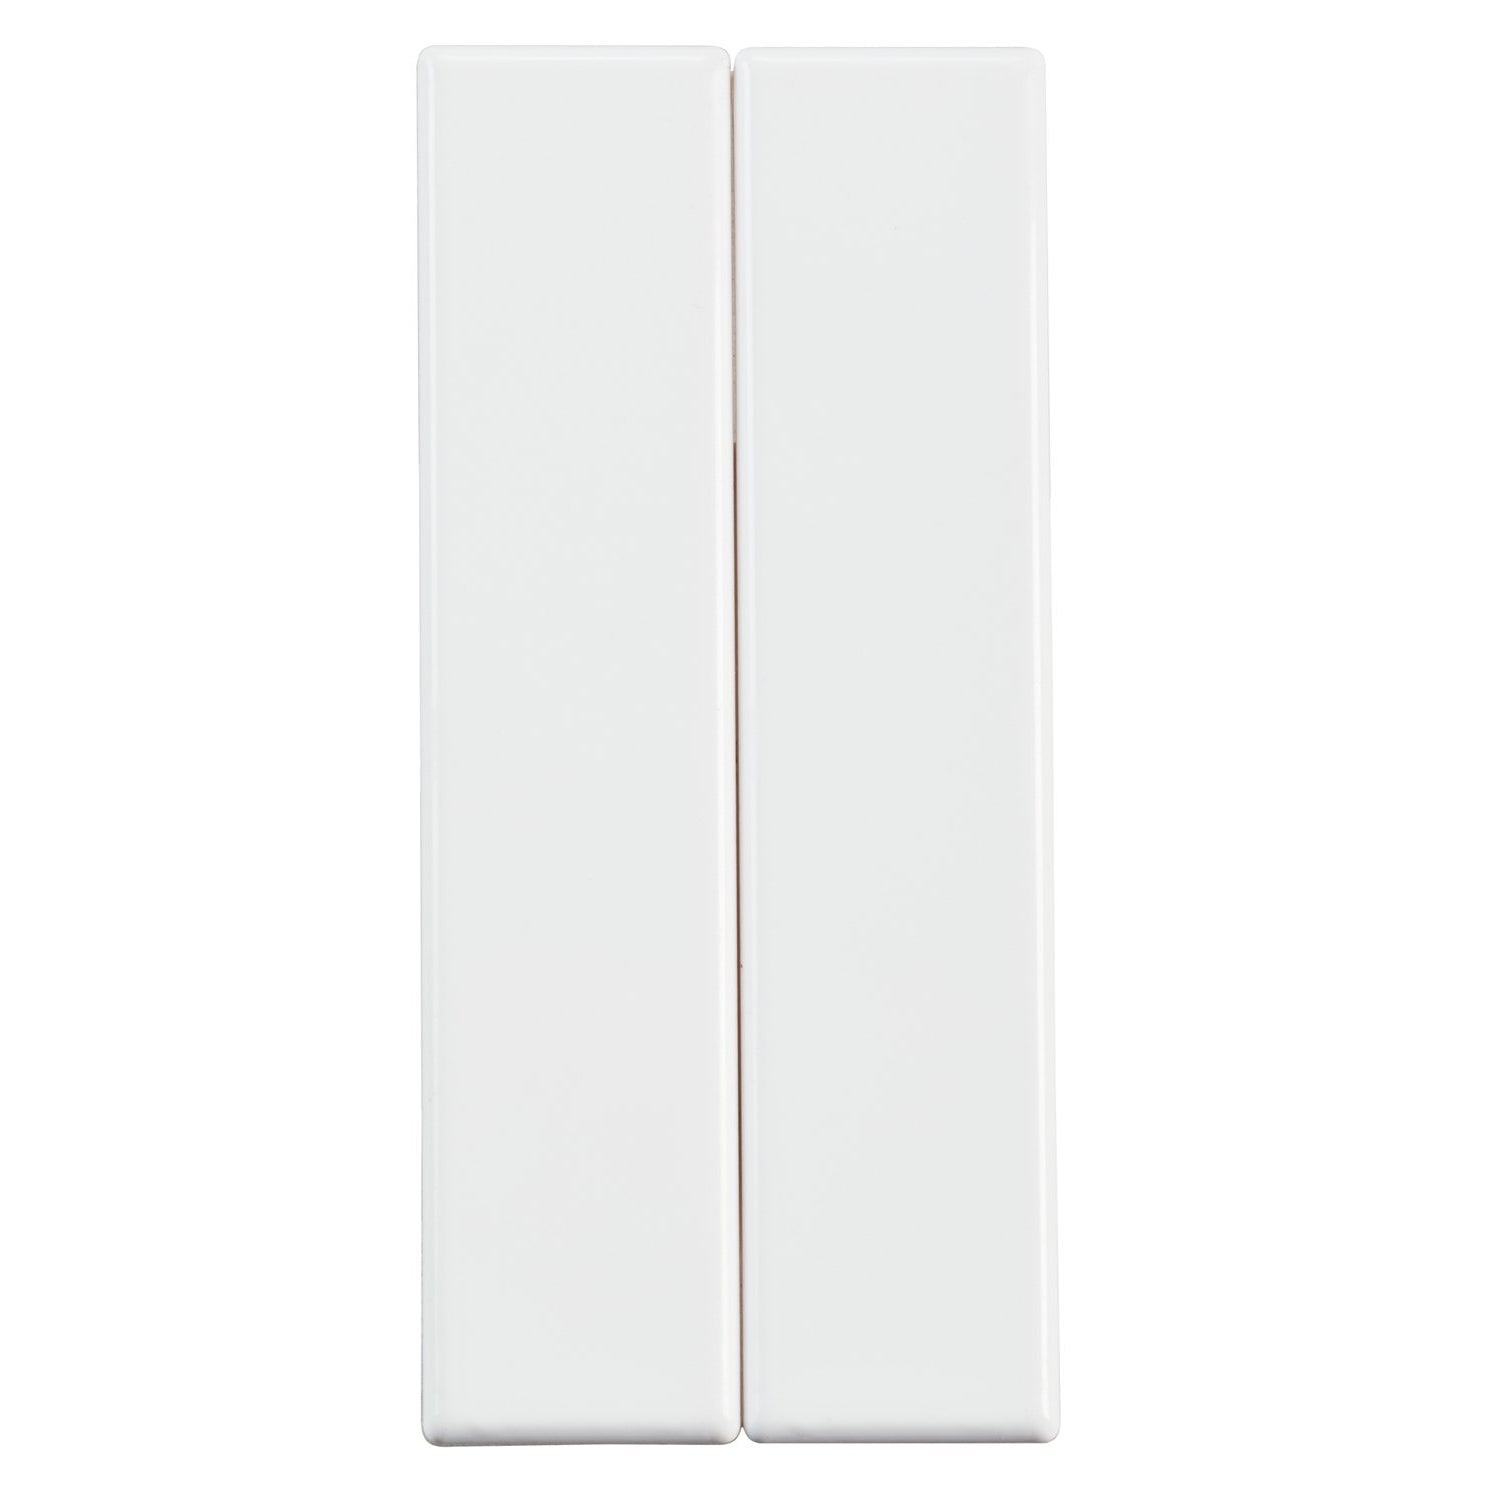 Accessory Outdoor Wall Light White Material (Not Painted)